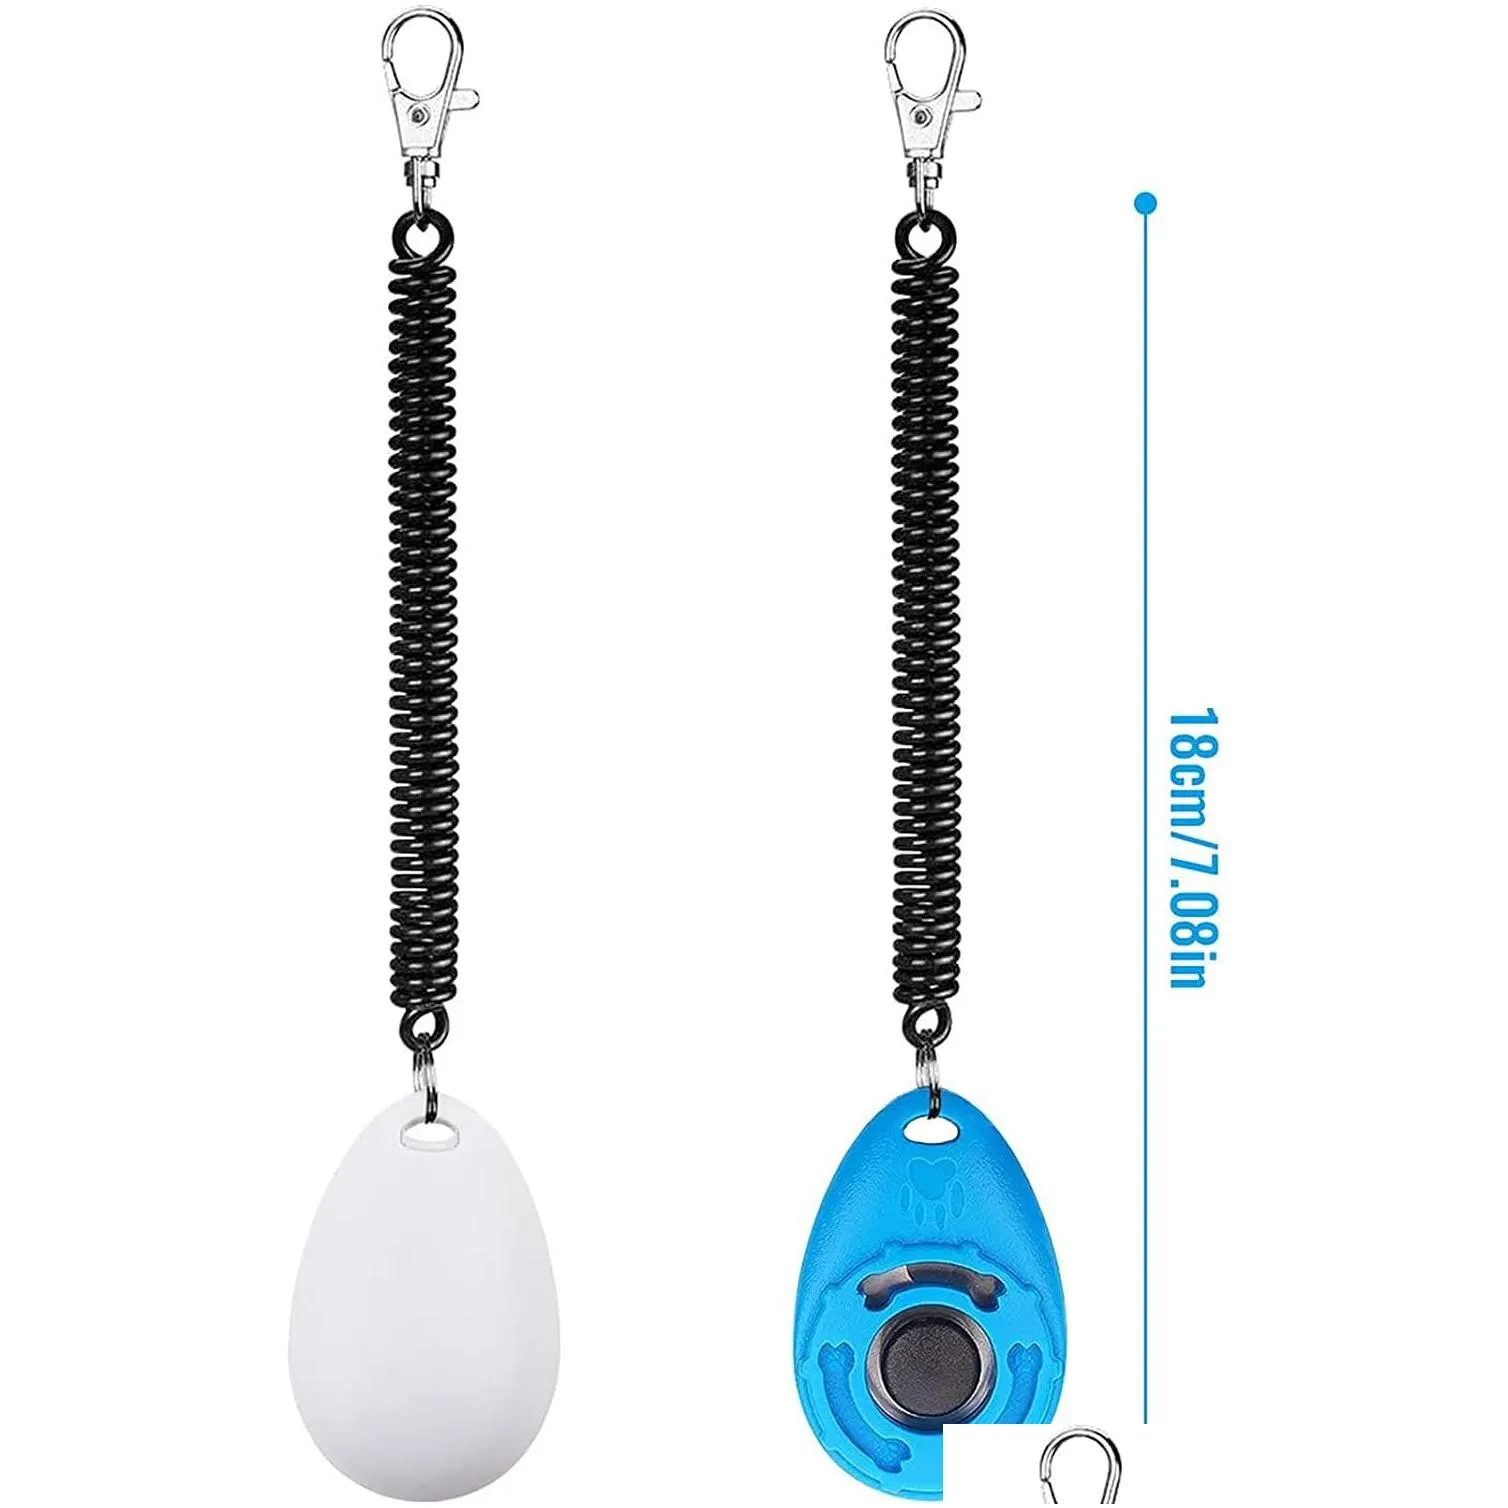 dog training clicker with wrist strap durable lightweight easy to use pet training clicker for cats puppy. perfect for behavioral training